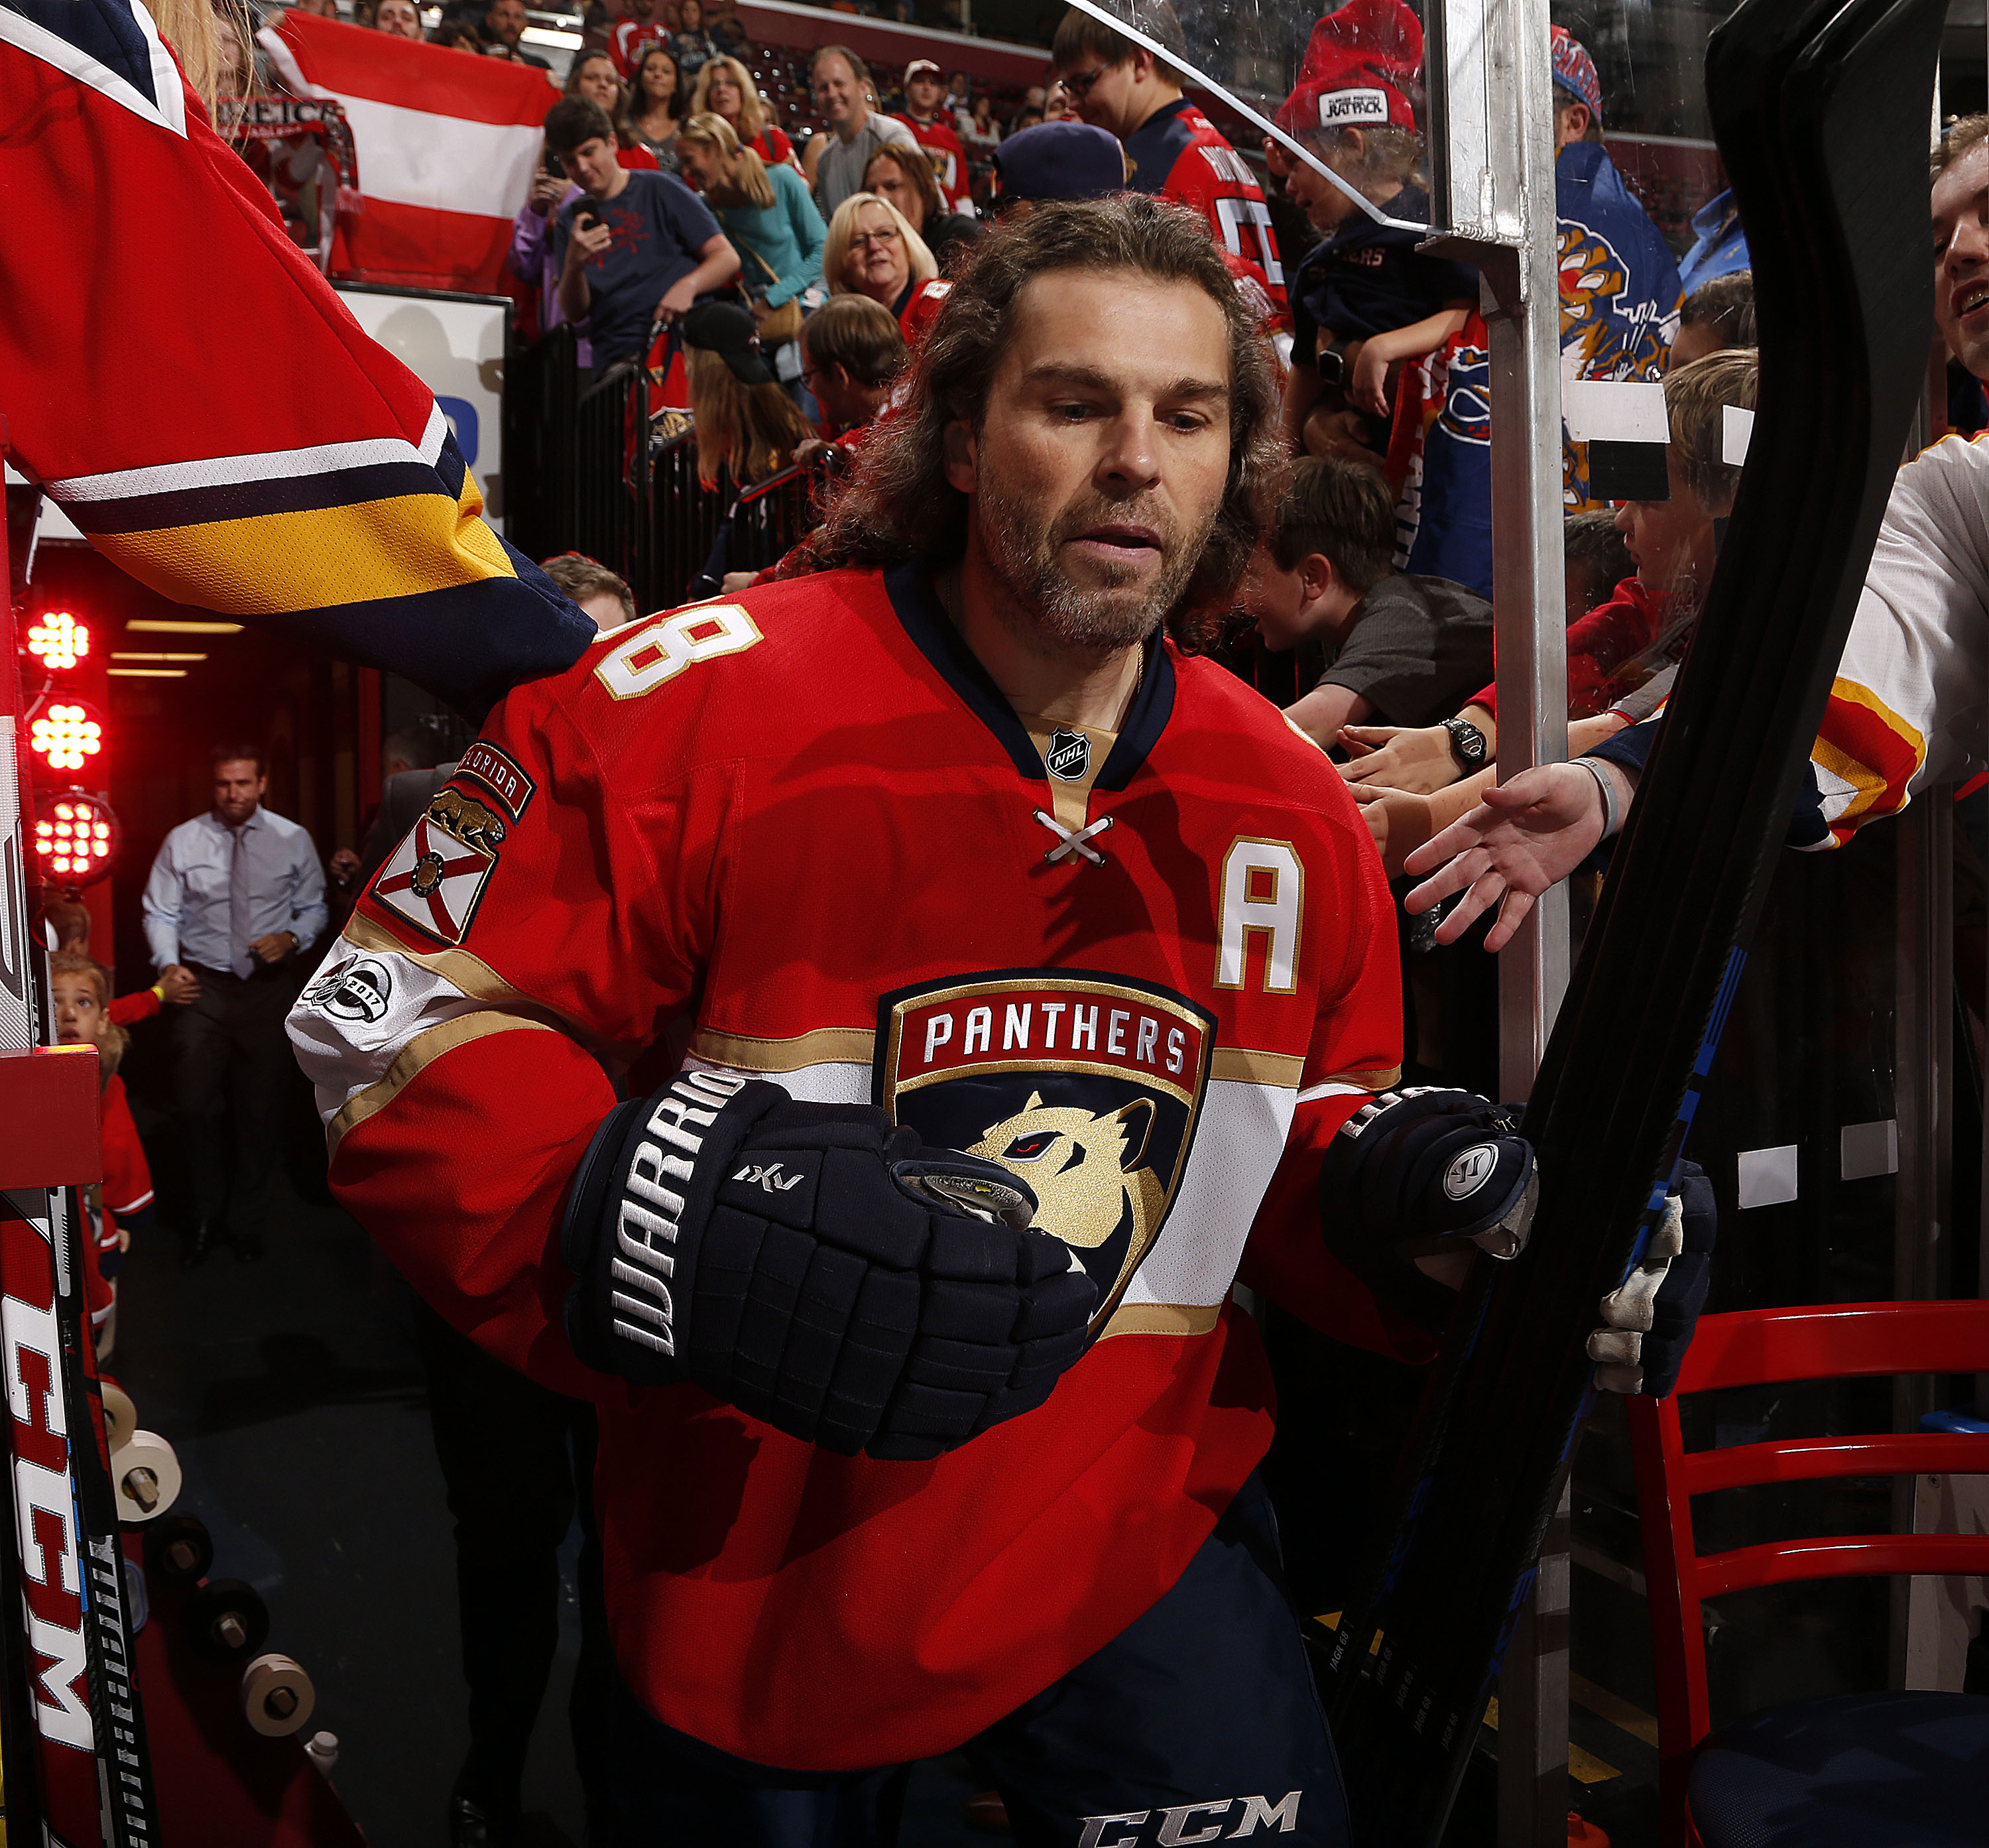 Of course Jaromir Jagr was out on the ice early testing out his